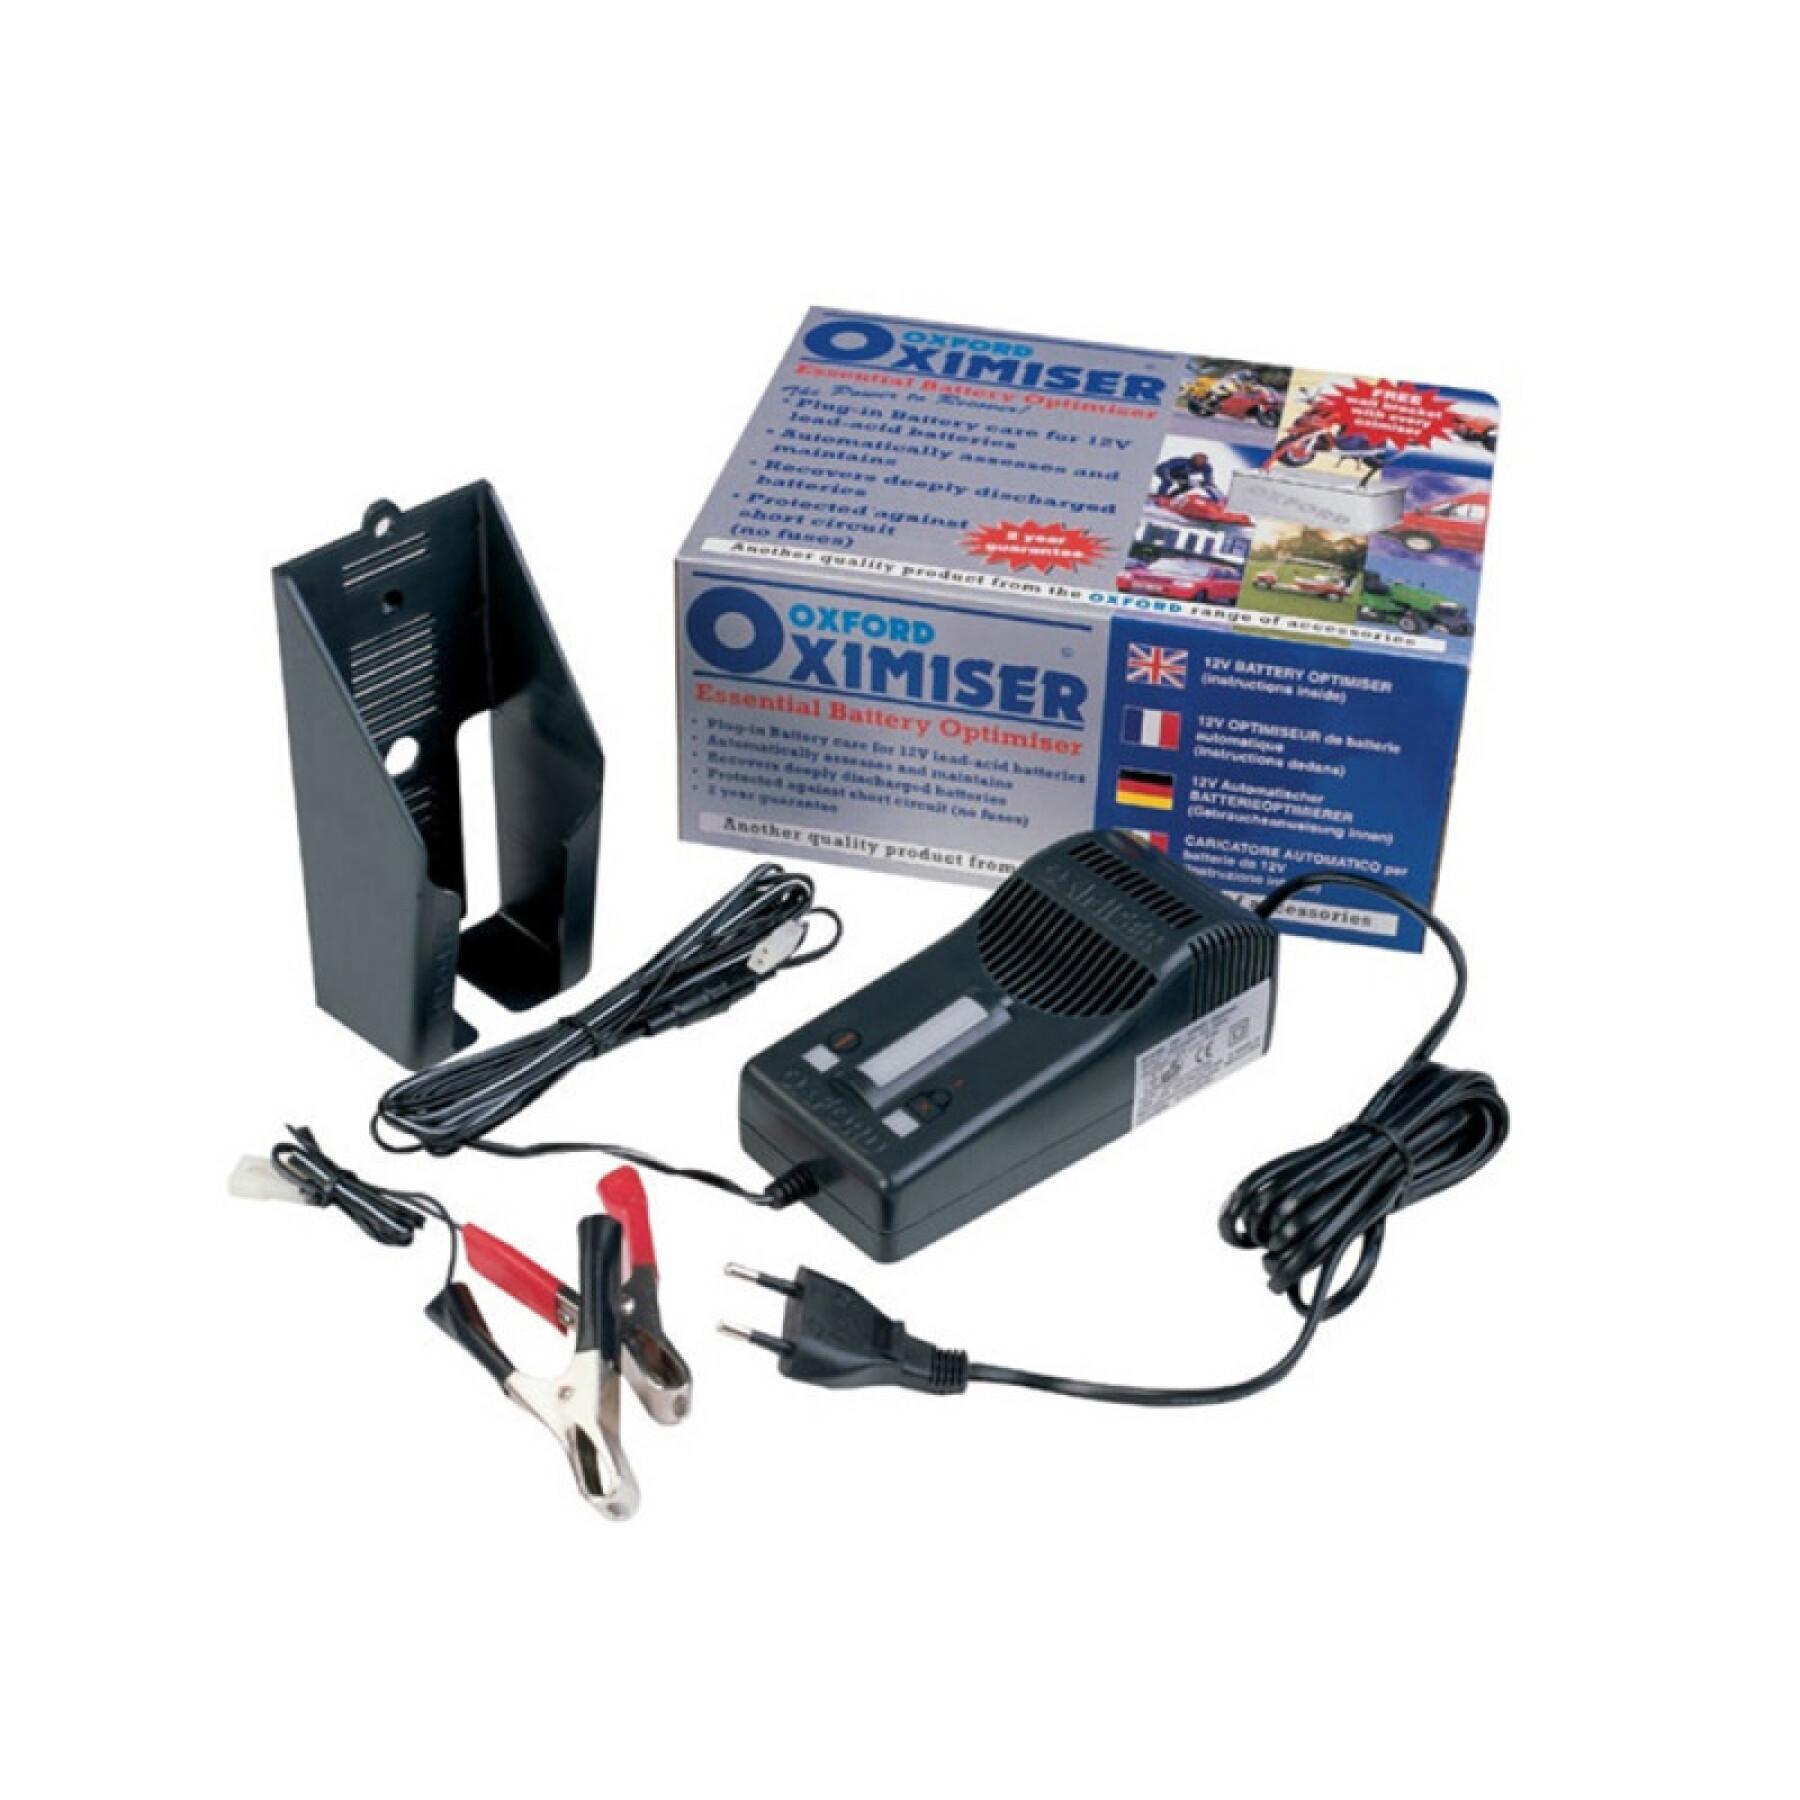 Battery charger Oxford Oximiser 600